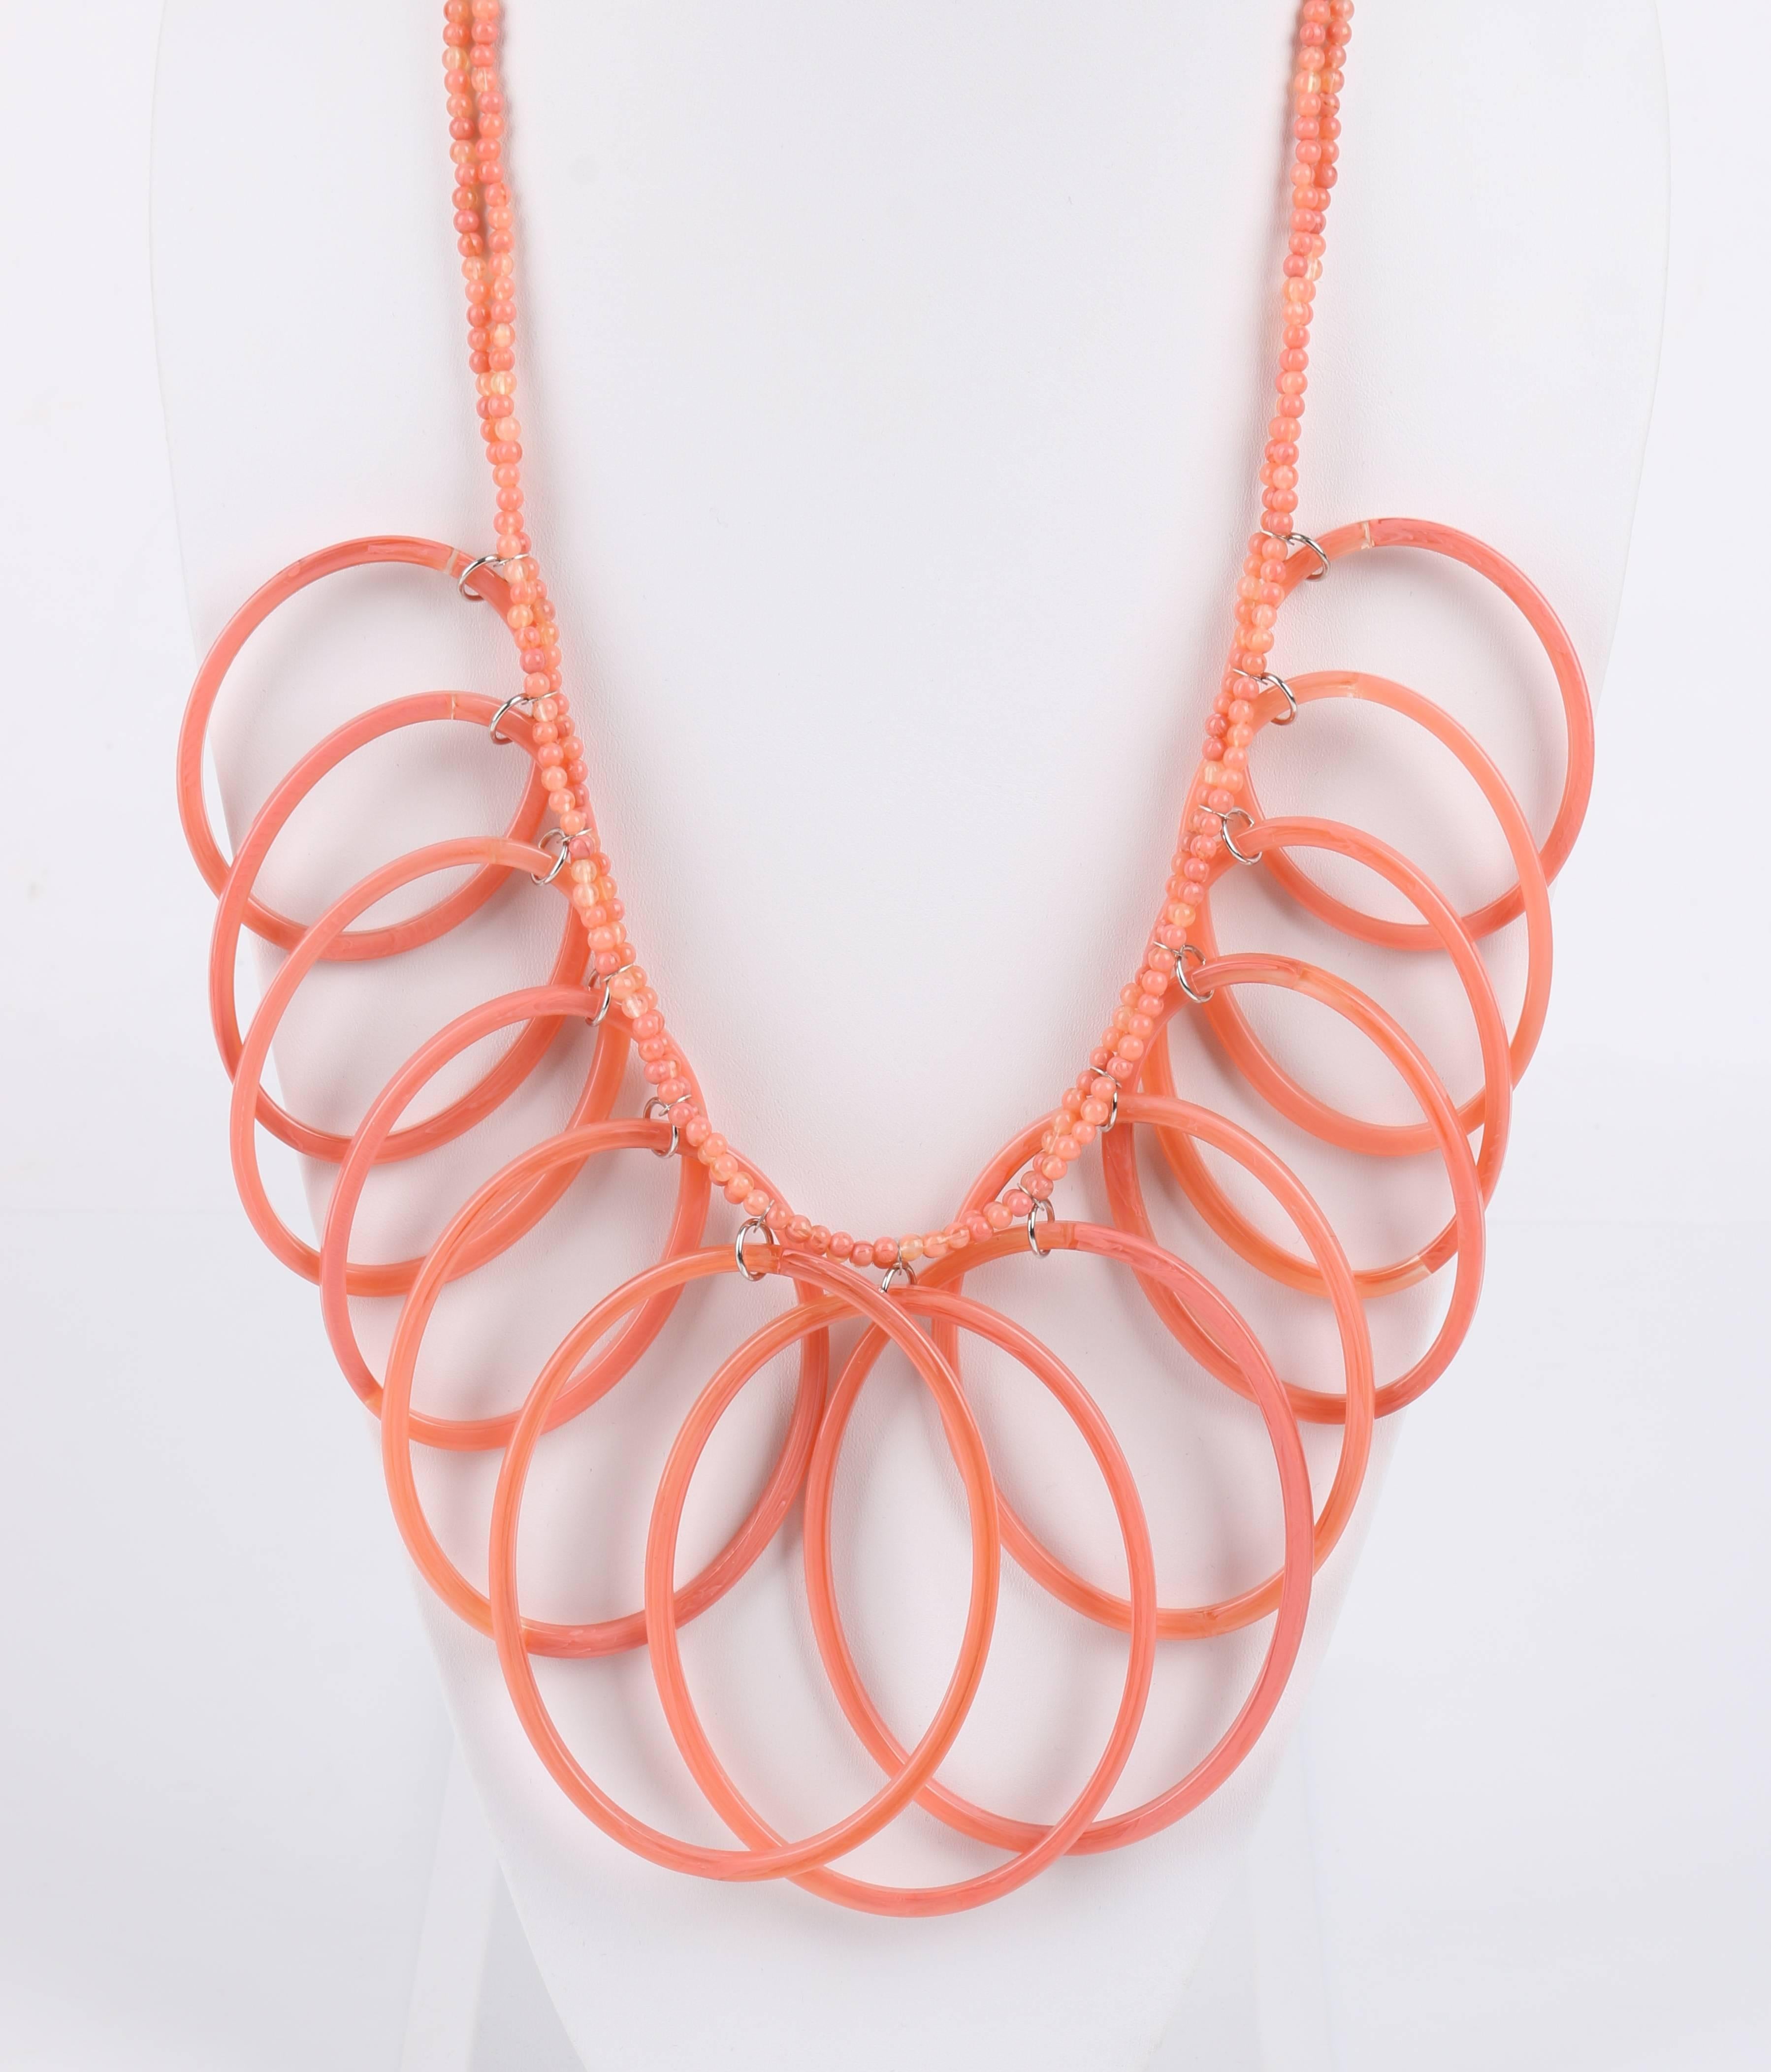 Women's MISSONI c.1980's Pink Salmon Lucite Oval Hoops Statement Necklace NOS For Sale